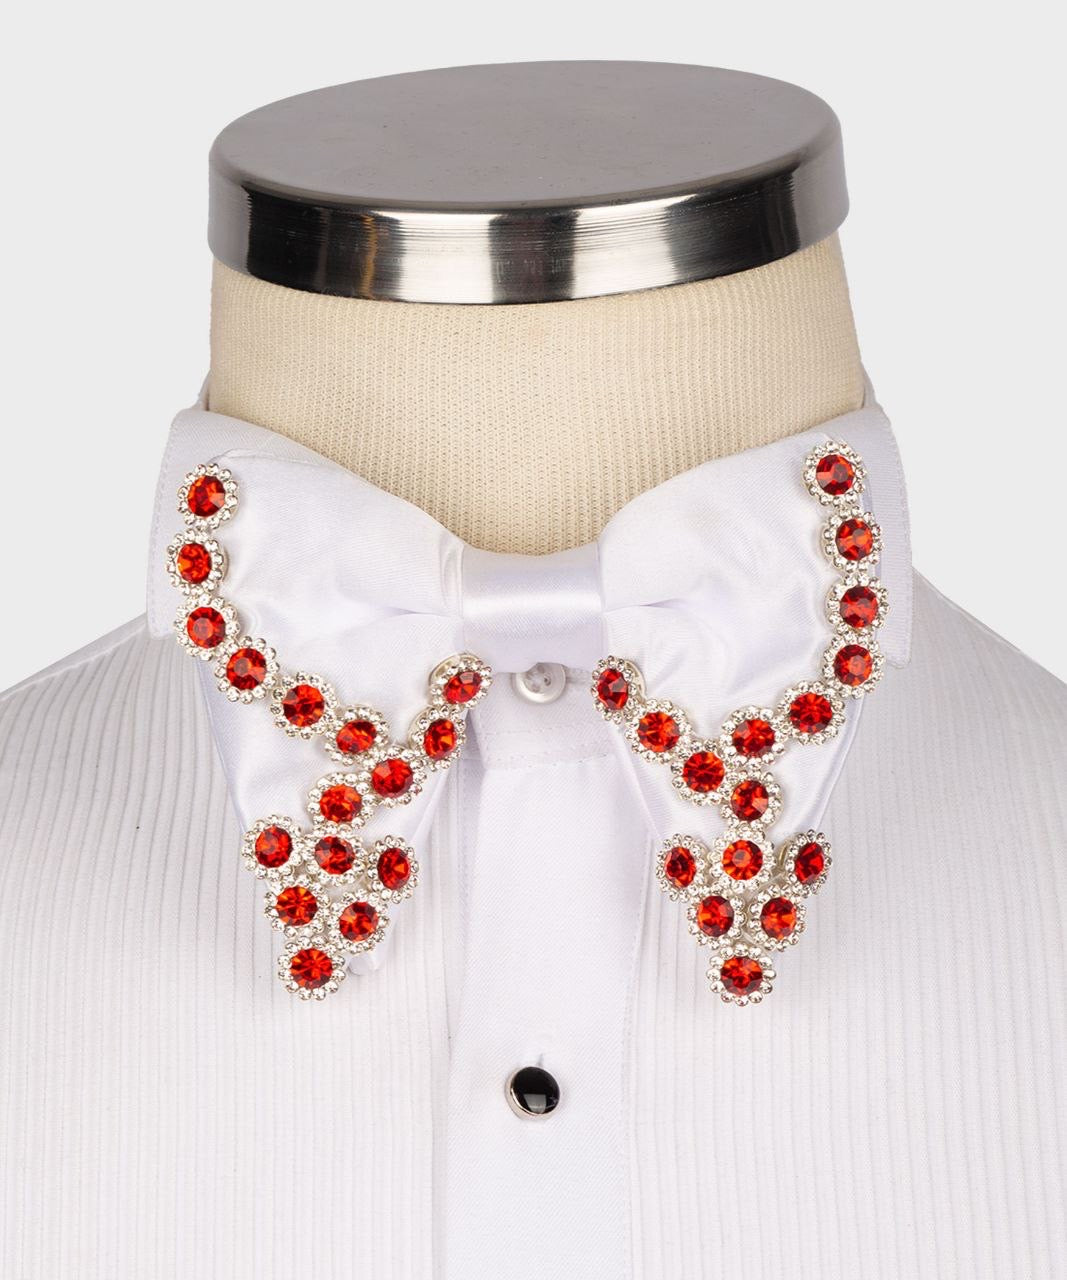 Large Bowtie, Stone Stitched, - White/Red, RD